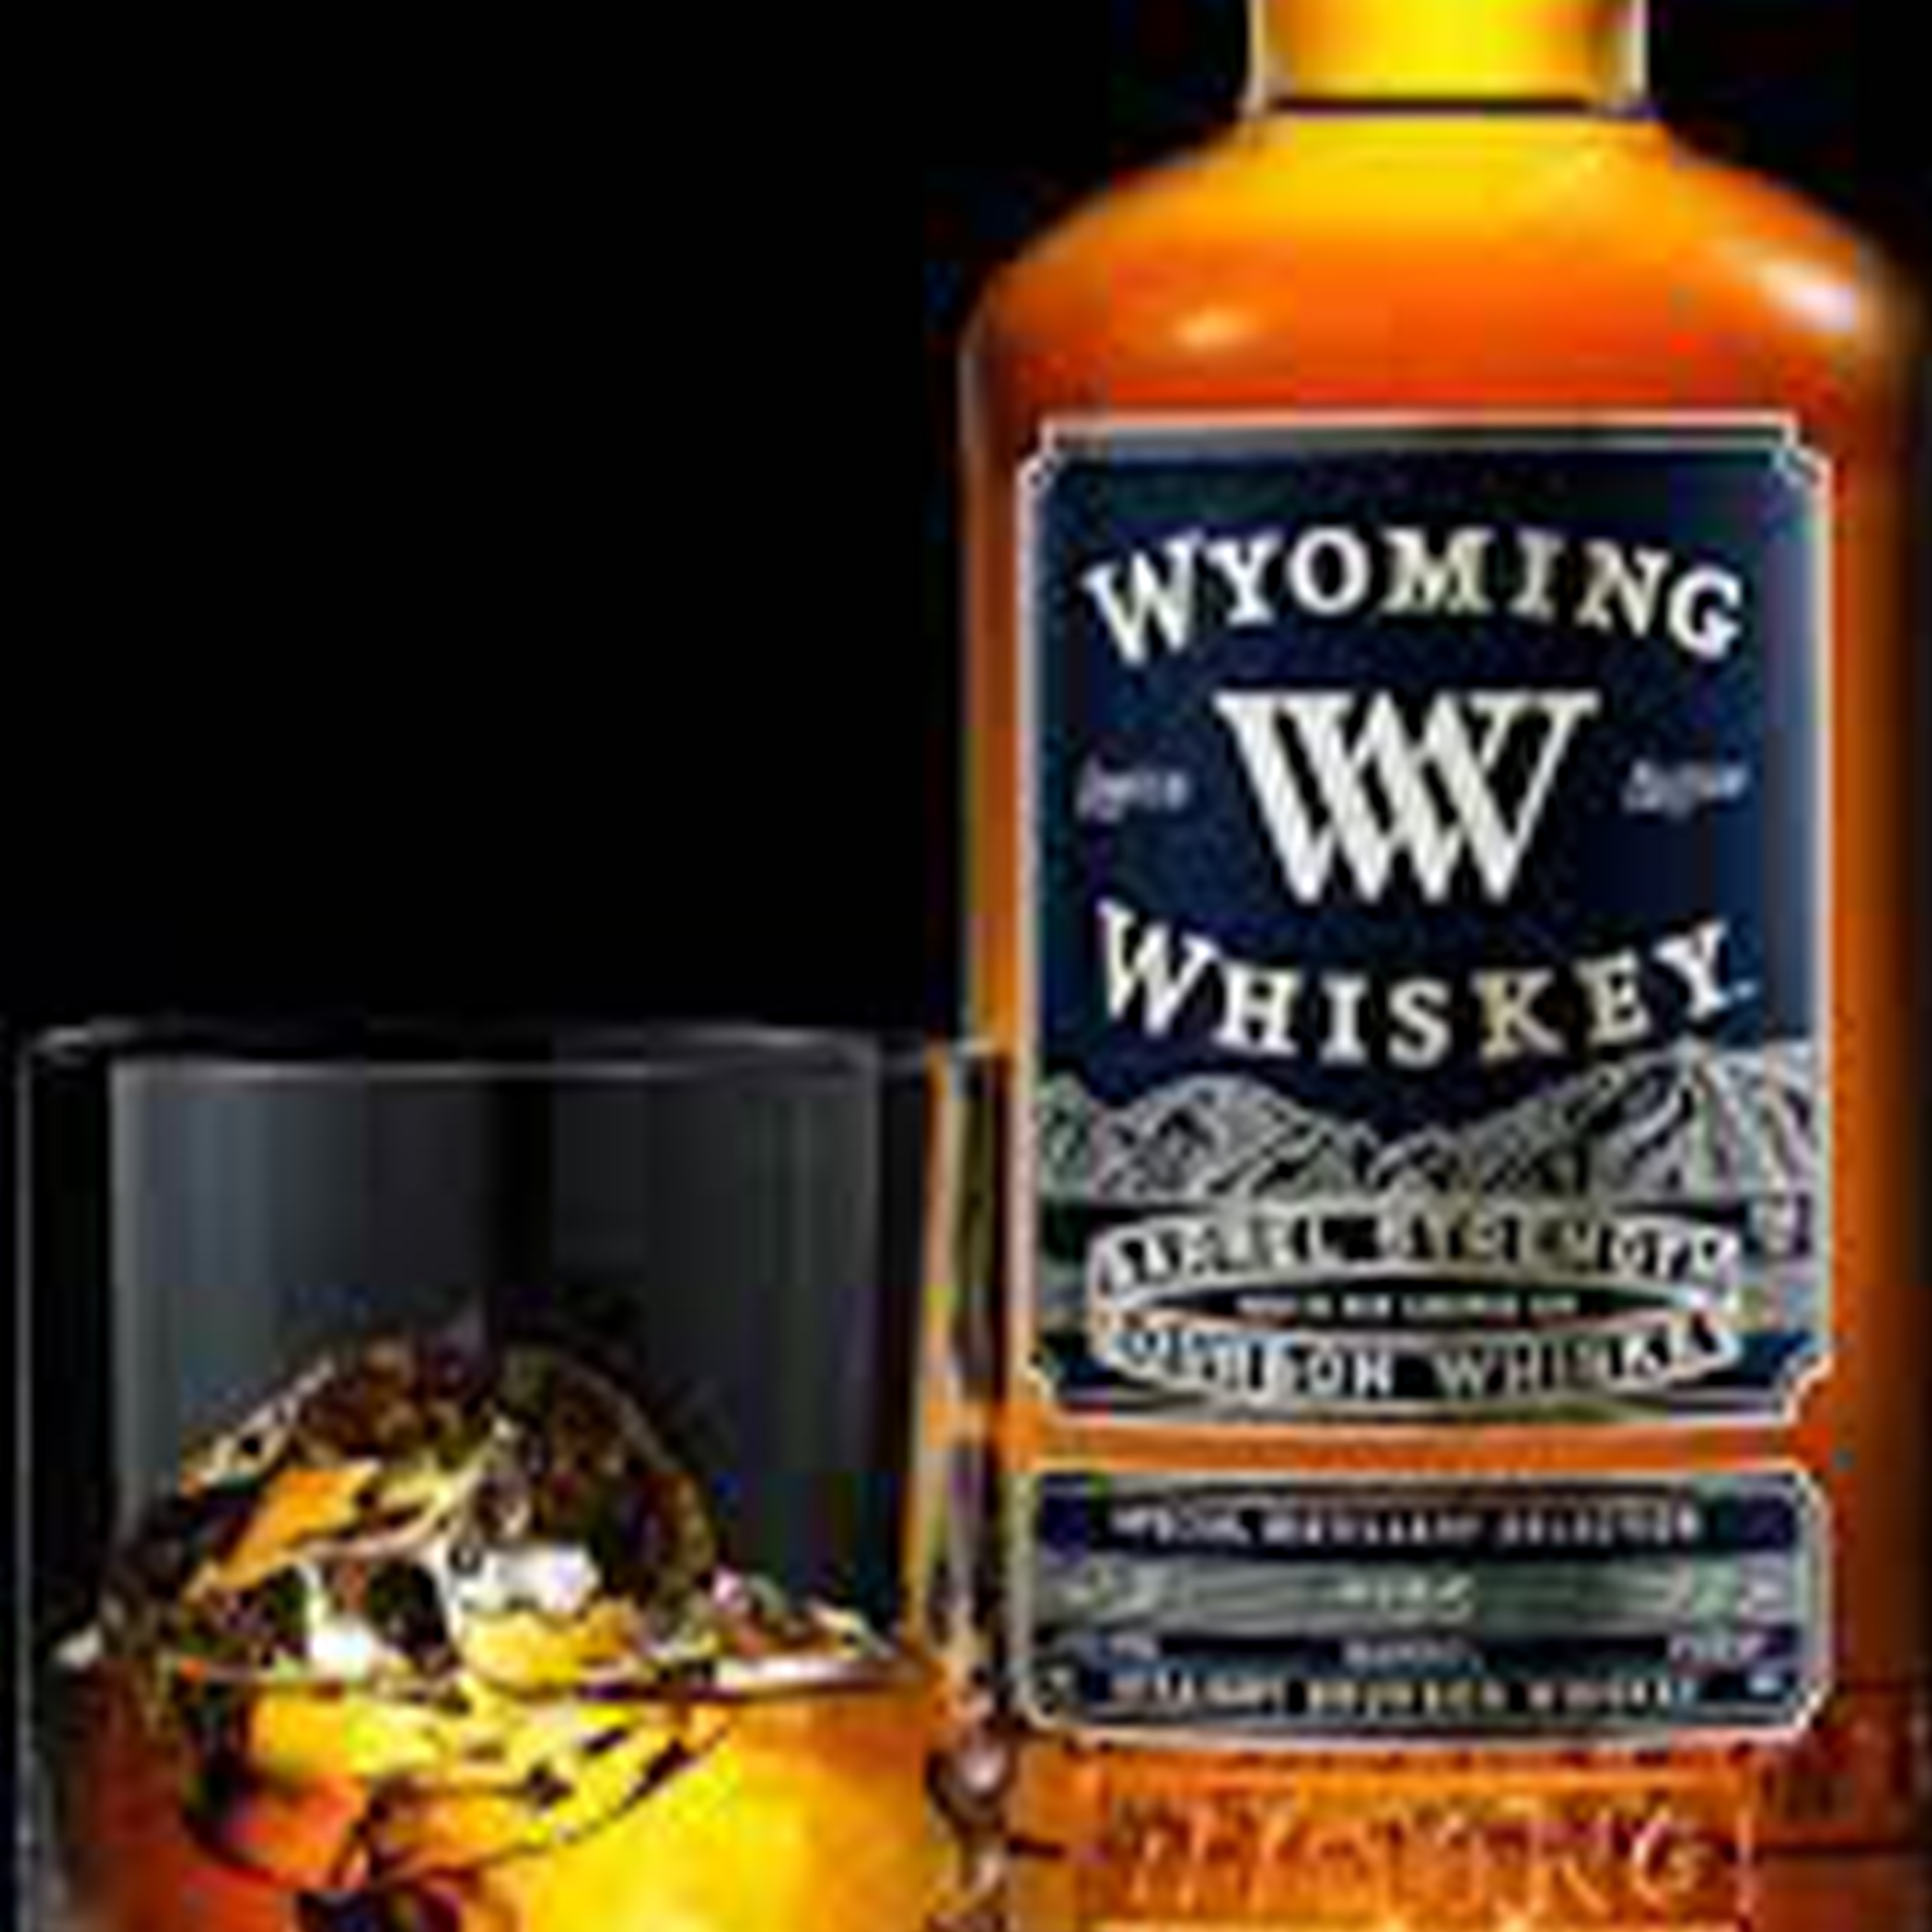 Wyoming Whiskey Barrel Strength Limited Edition Bourbon